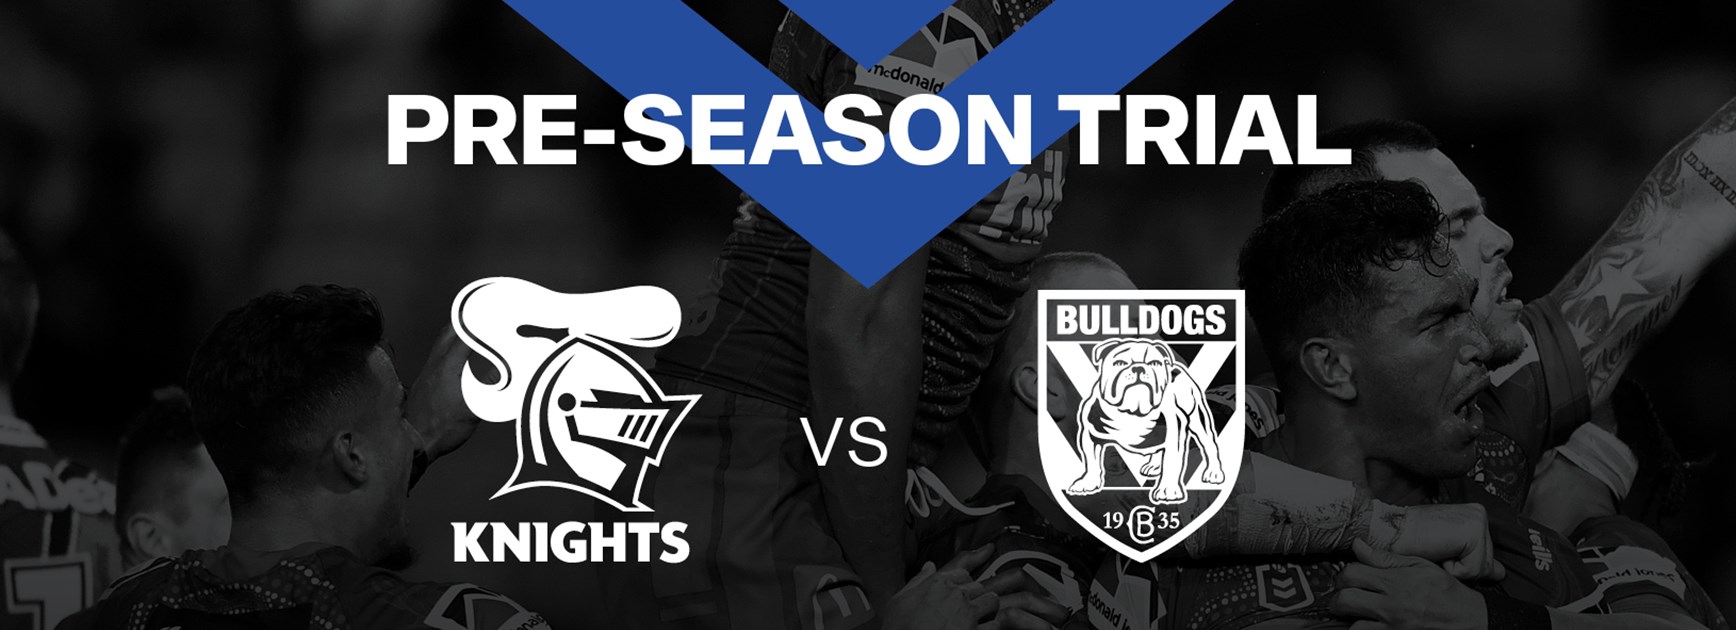 Tickets on sale for Bulldogs trial